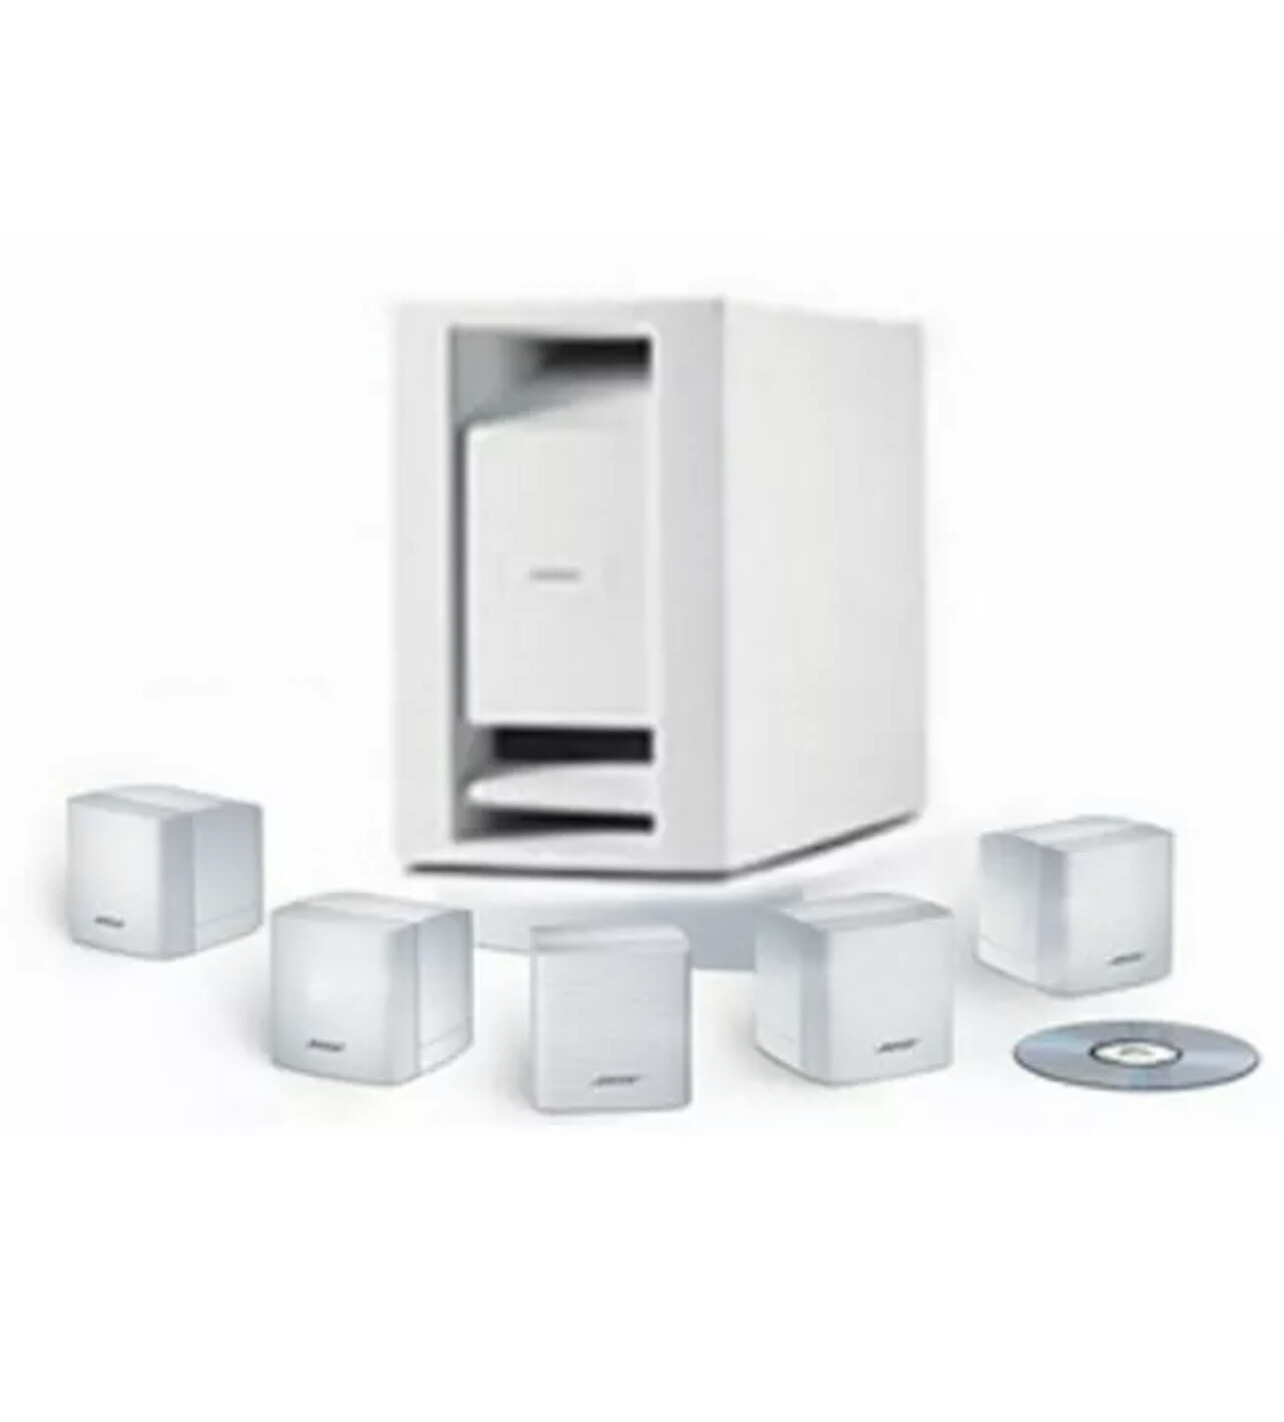 Bose Lifestyle V10 Home Theater System - White